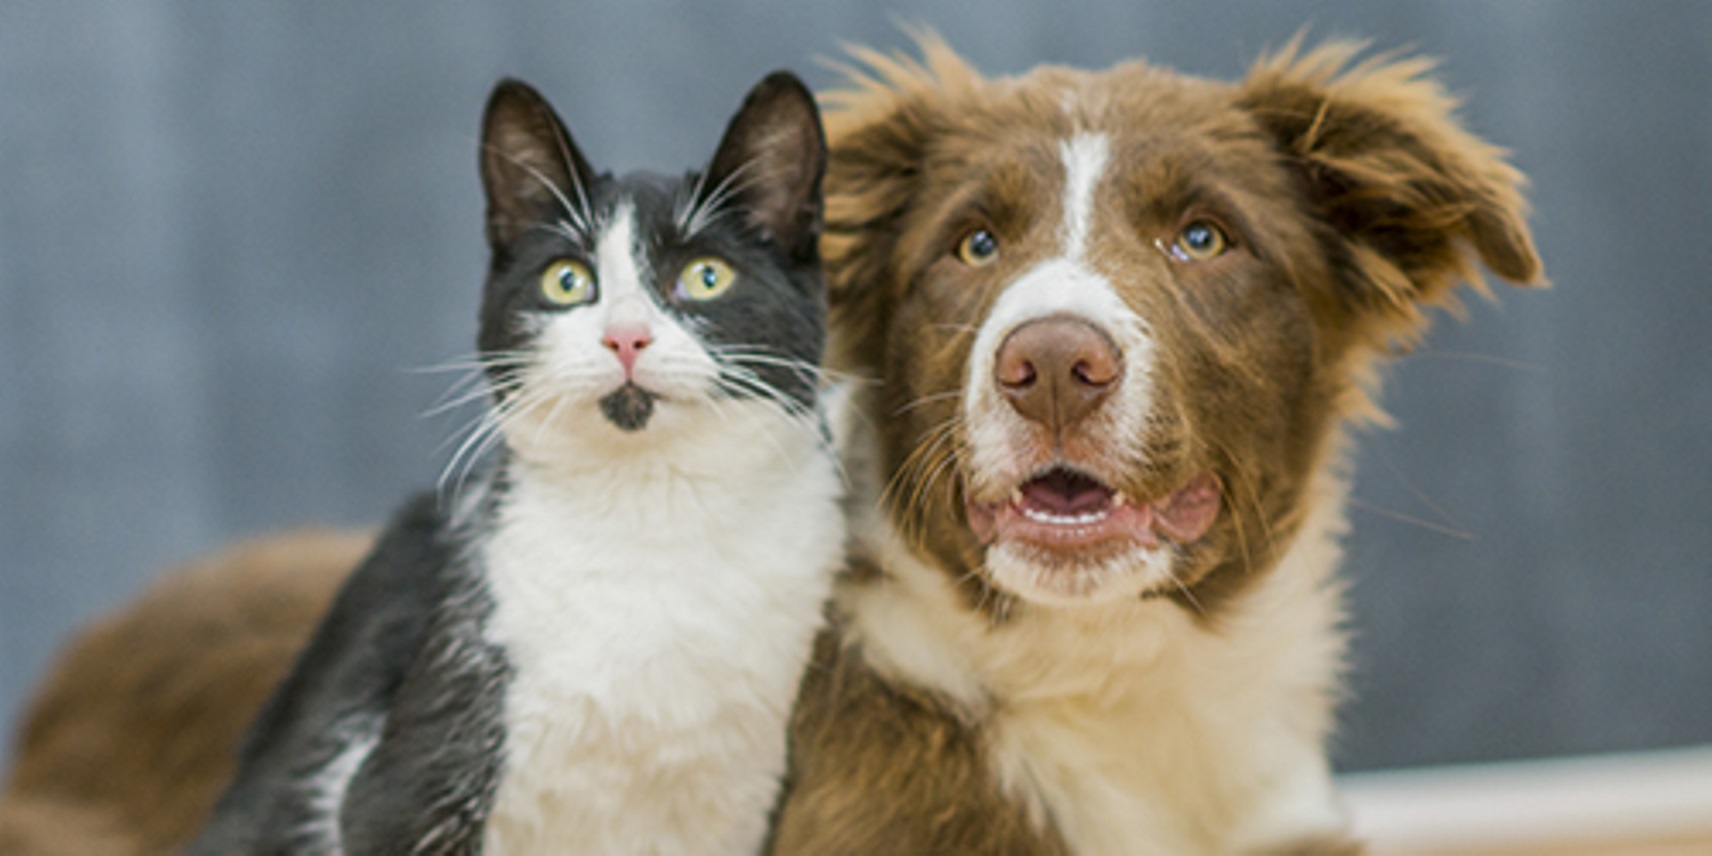 How to help cats and dogs get along